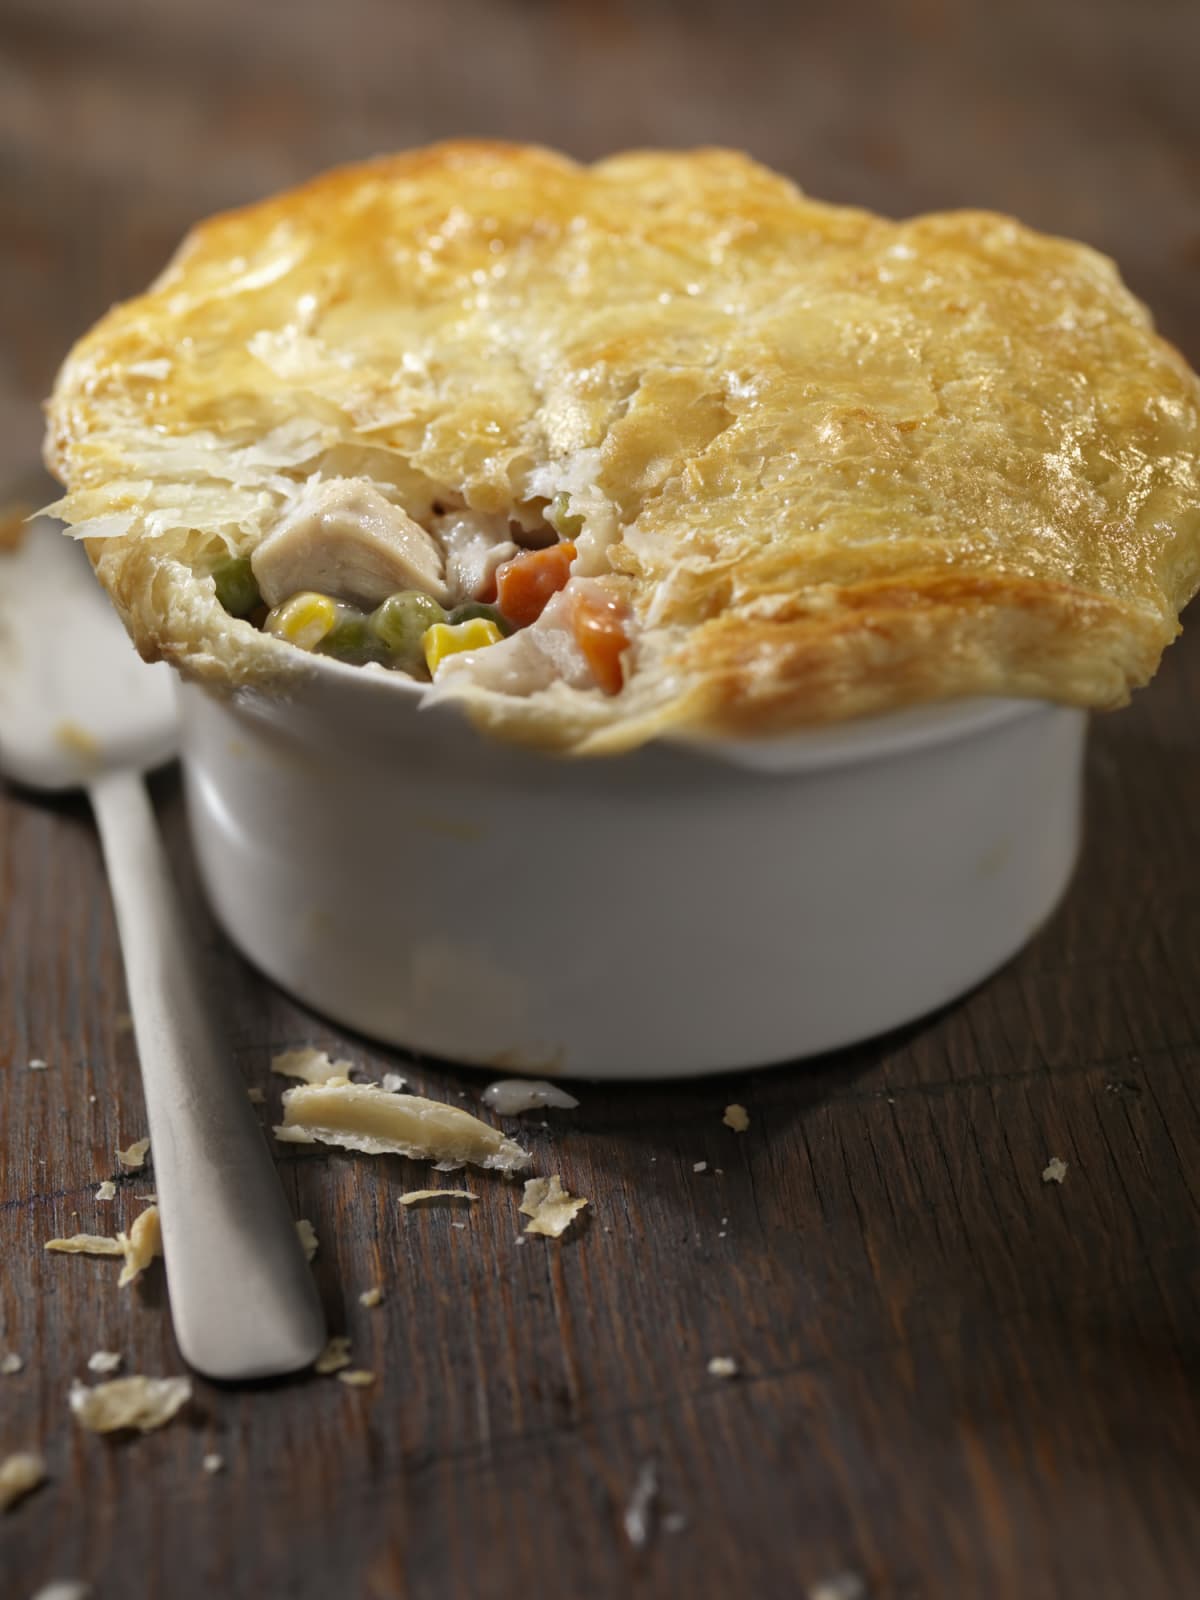 Chicken pot pie with exposed filling